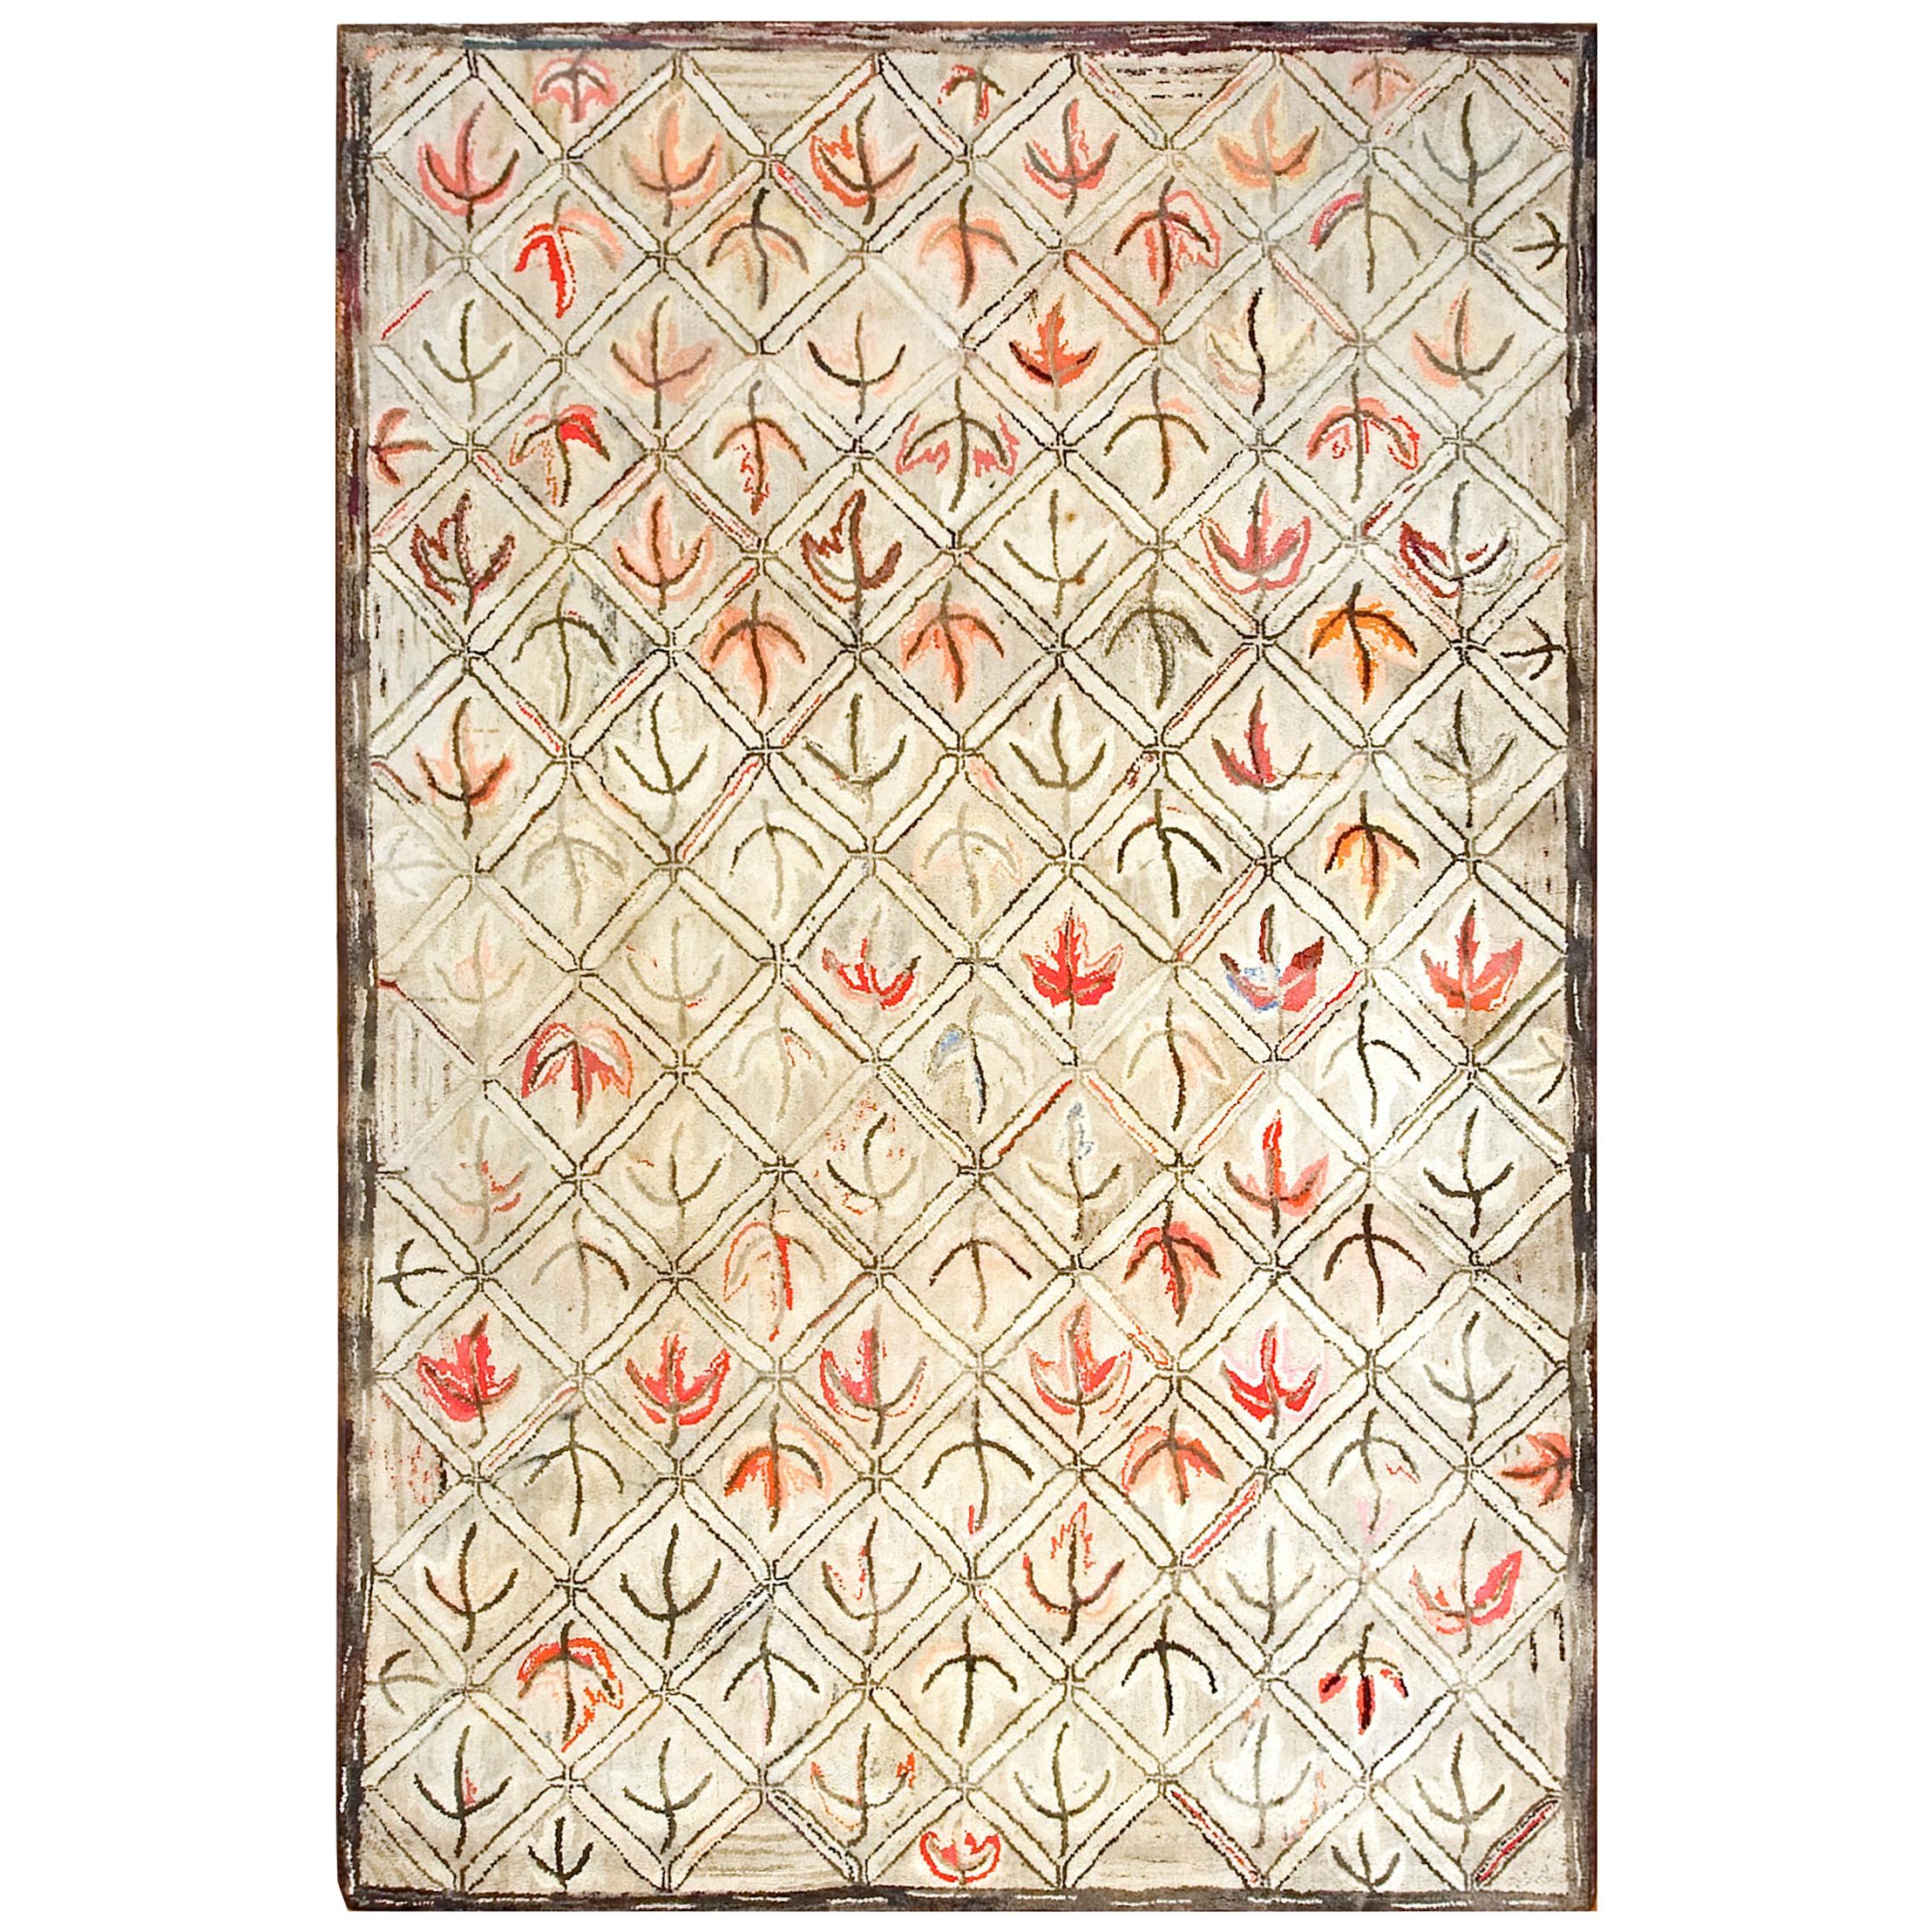 Early 20th Century American Hooked Rug ( 6' x 9' - 183  275 ) For Sale